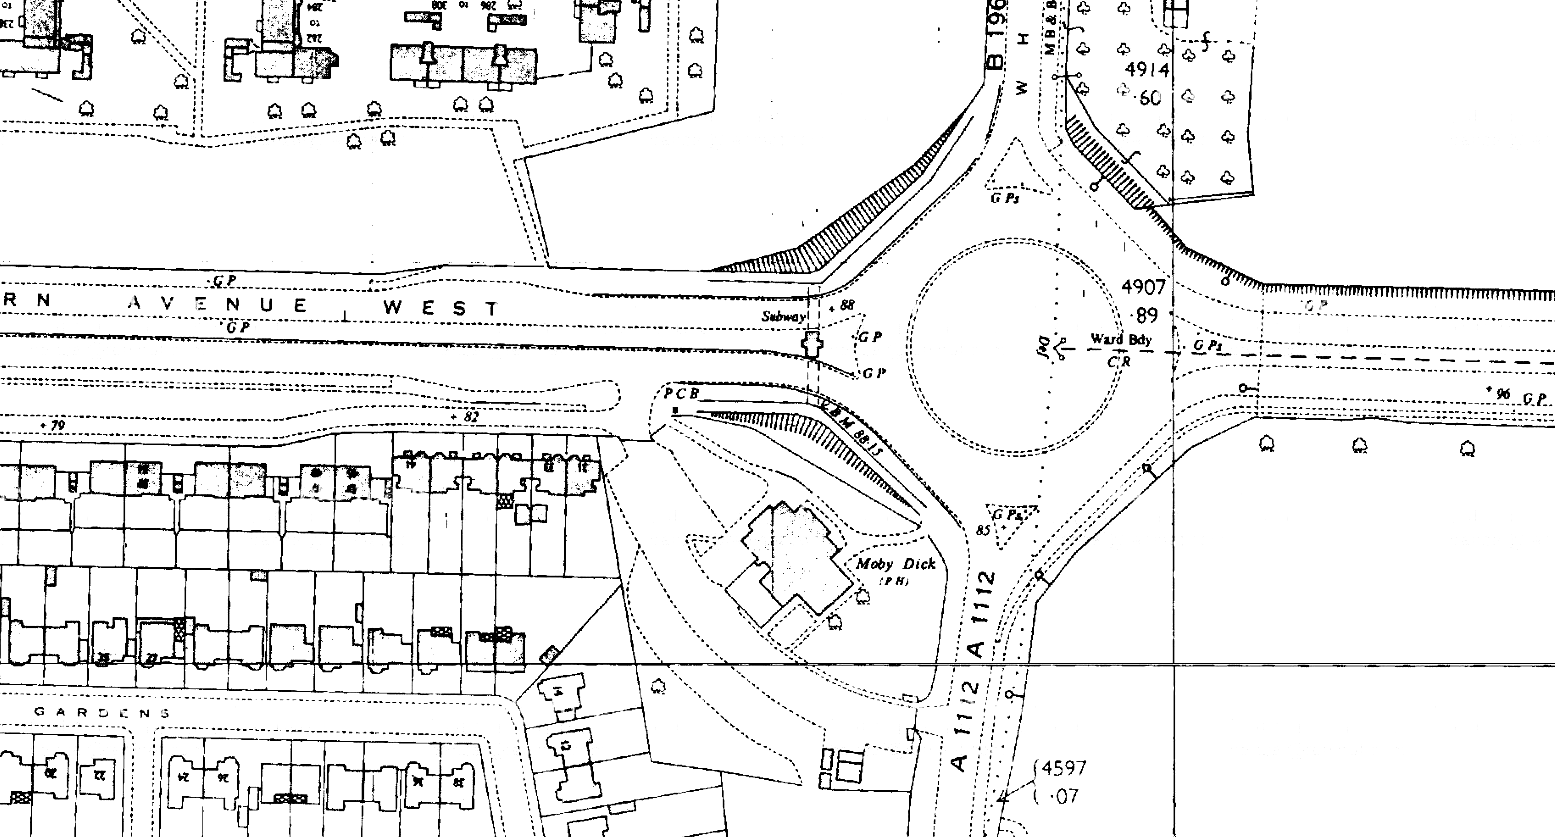 K19--Moby Dick Roundabout, Chadwell Heath Box--1963-1964 OS Map Extract 1-2500.png